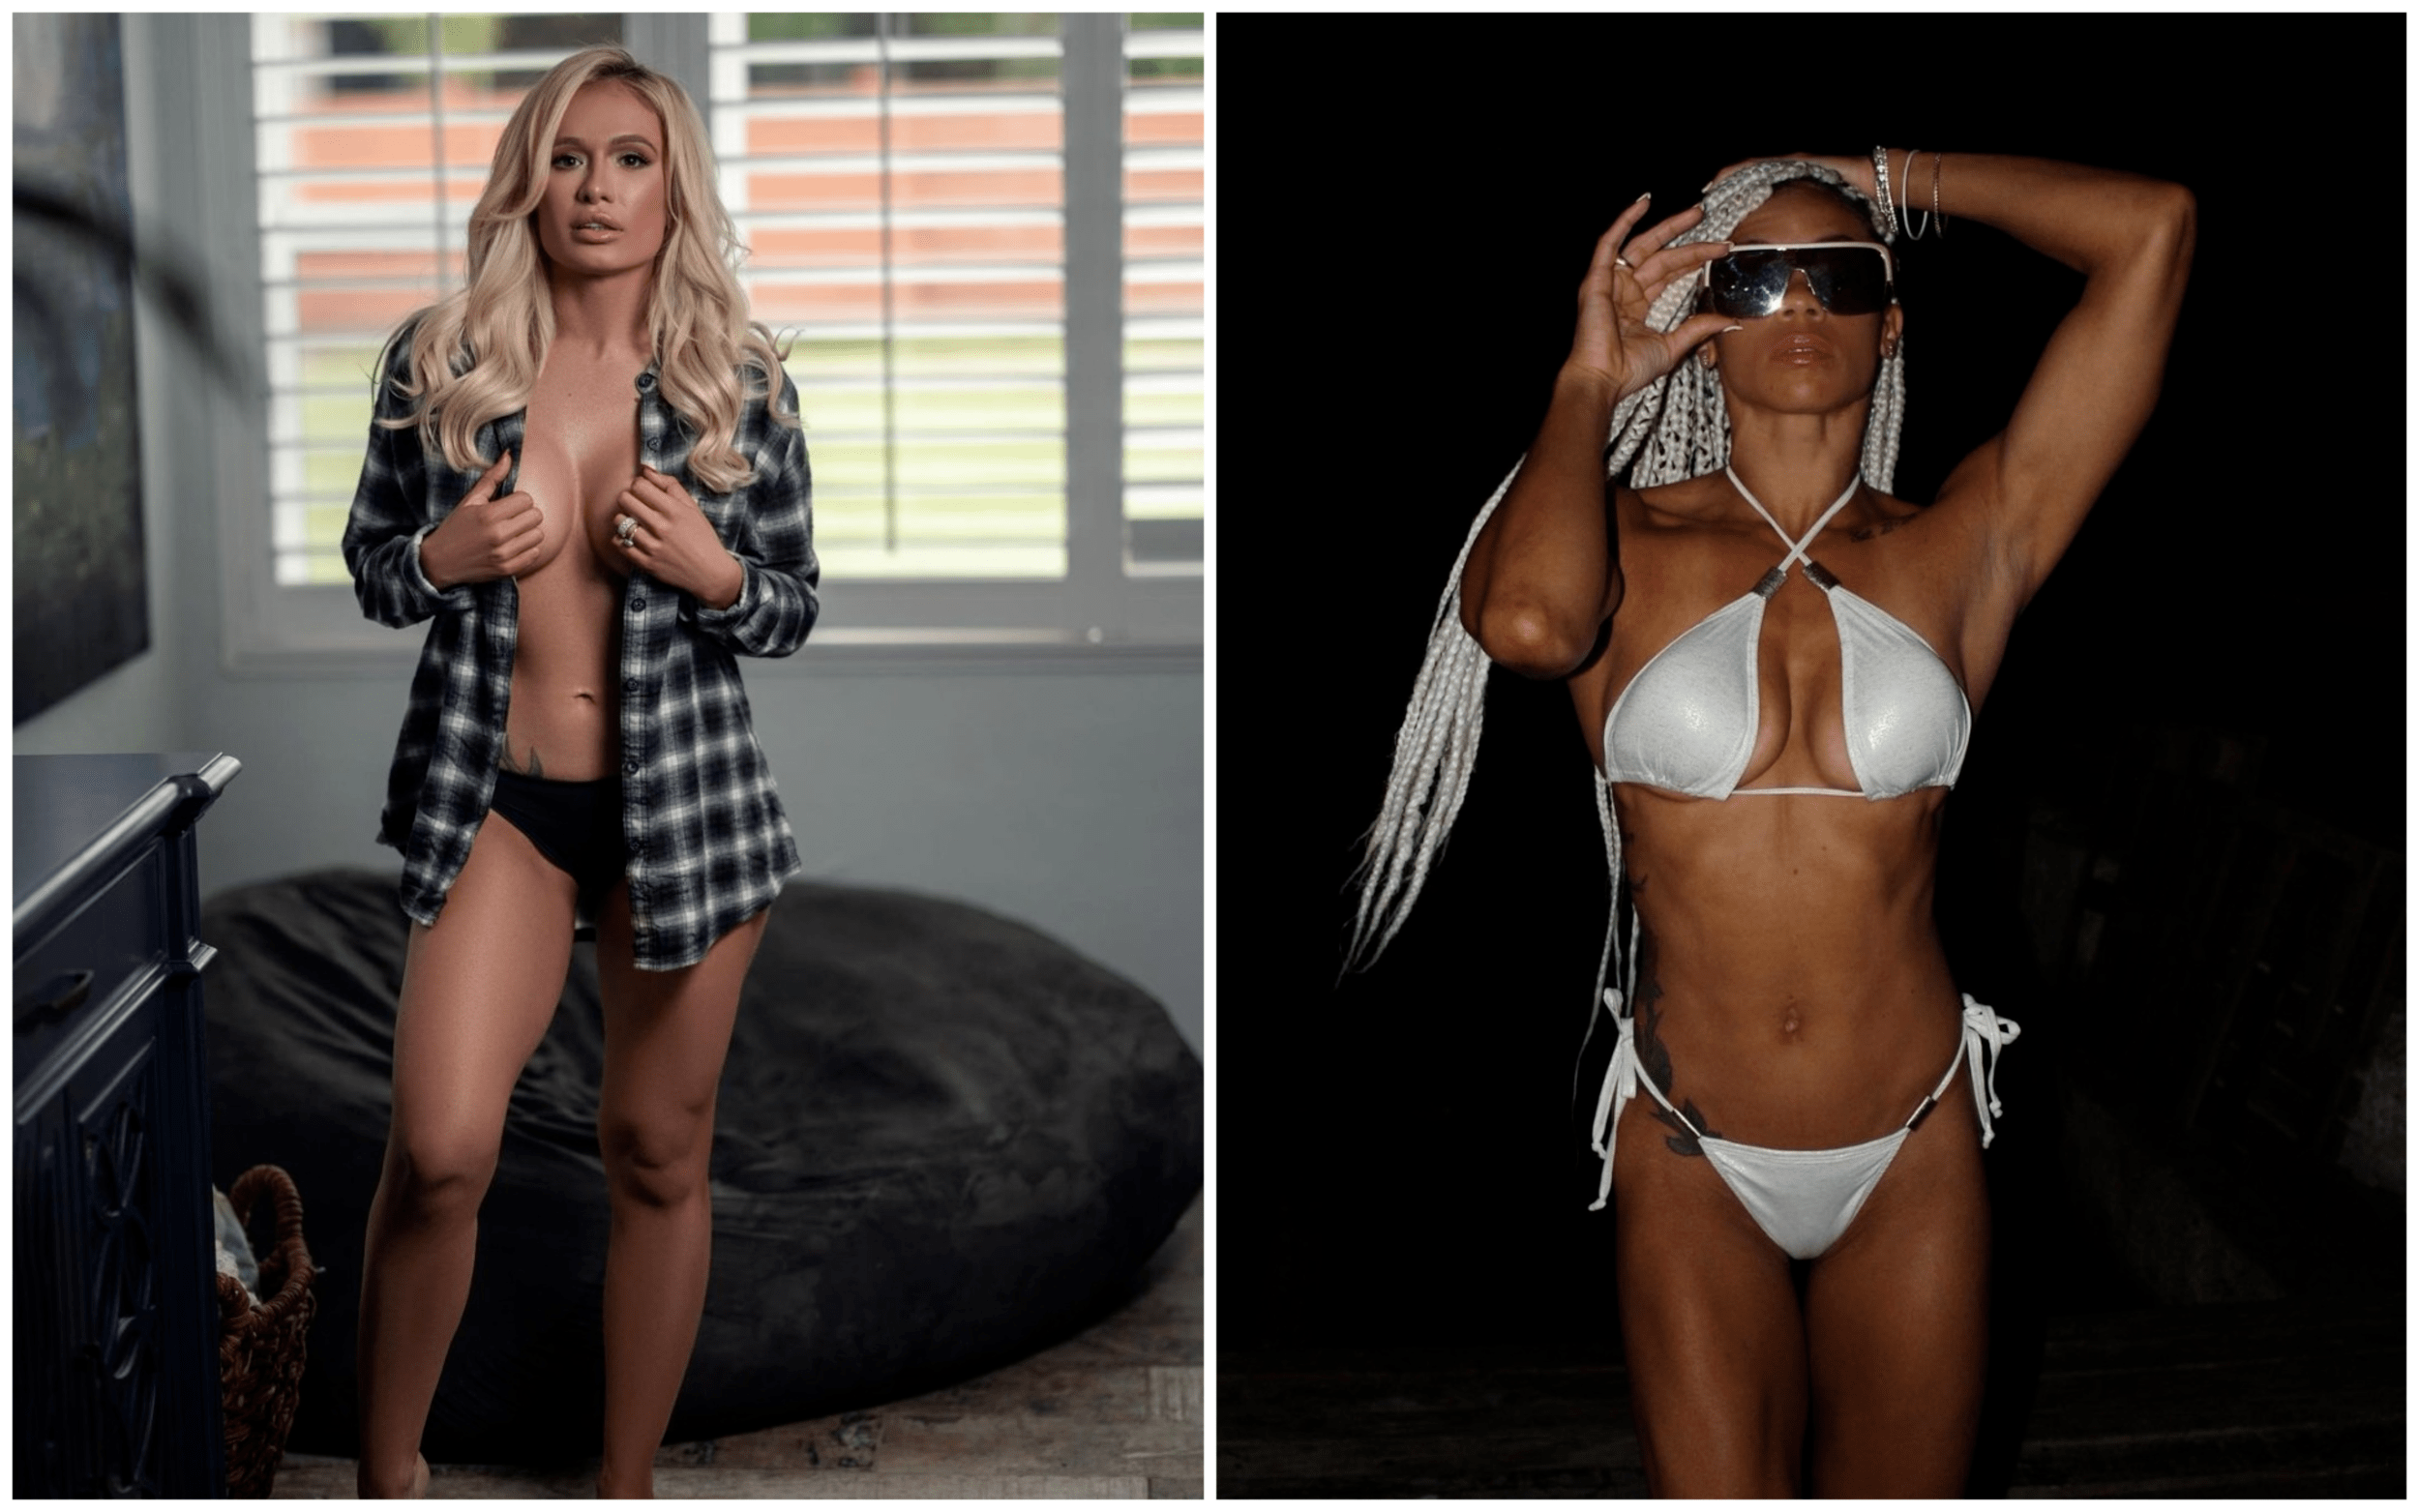 Returning Wwe Stars Scarlett Bordeaux And B Fab Are Both On Onlyfans